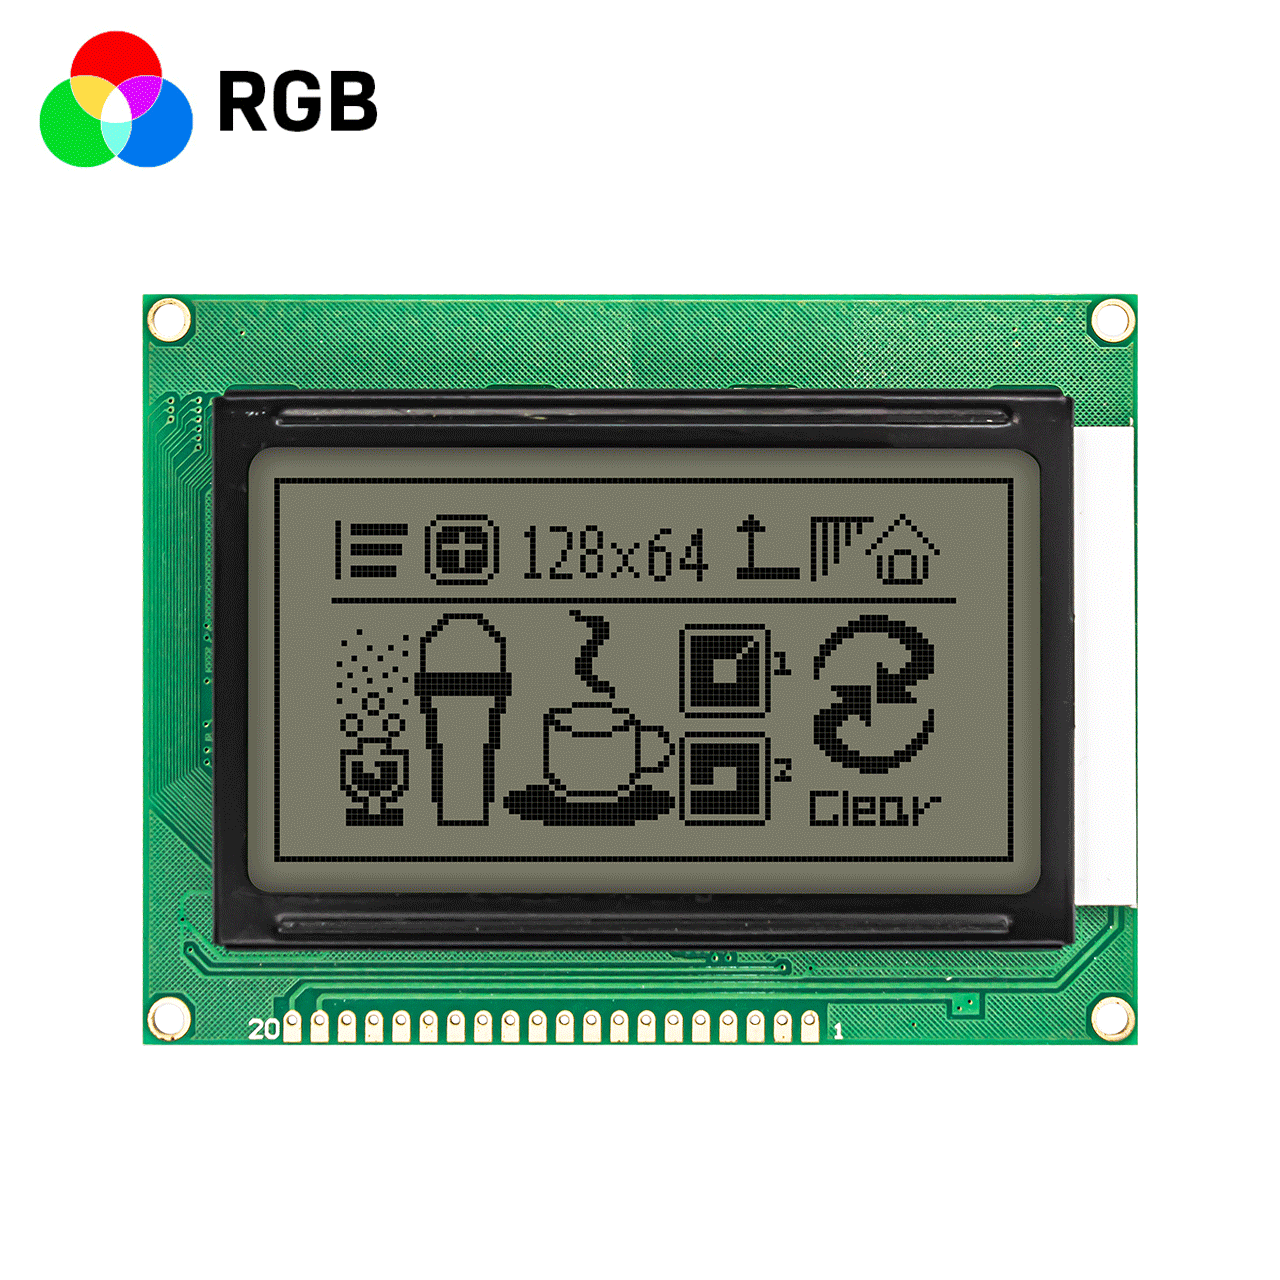 3.2-inch LCD12864 LCD screen/LCM128x64 graphic dot matrix module/RGB red, green and blue backlight/Chinese font library